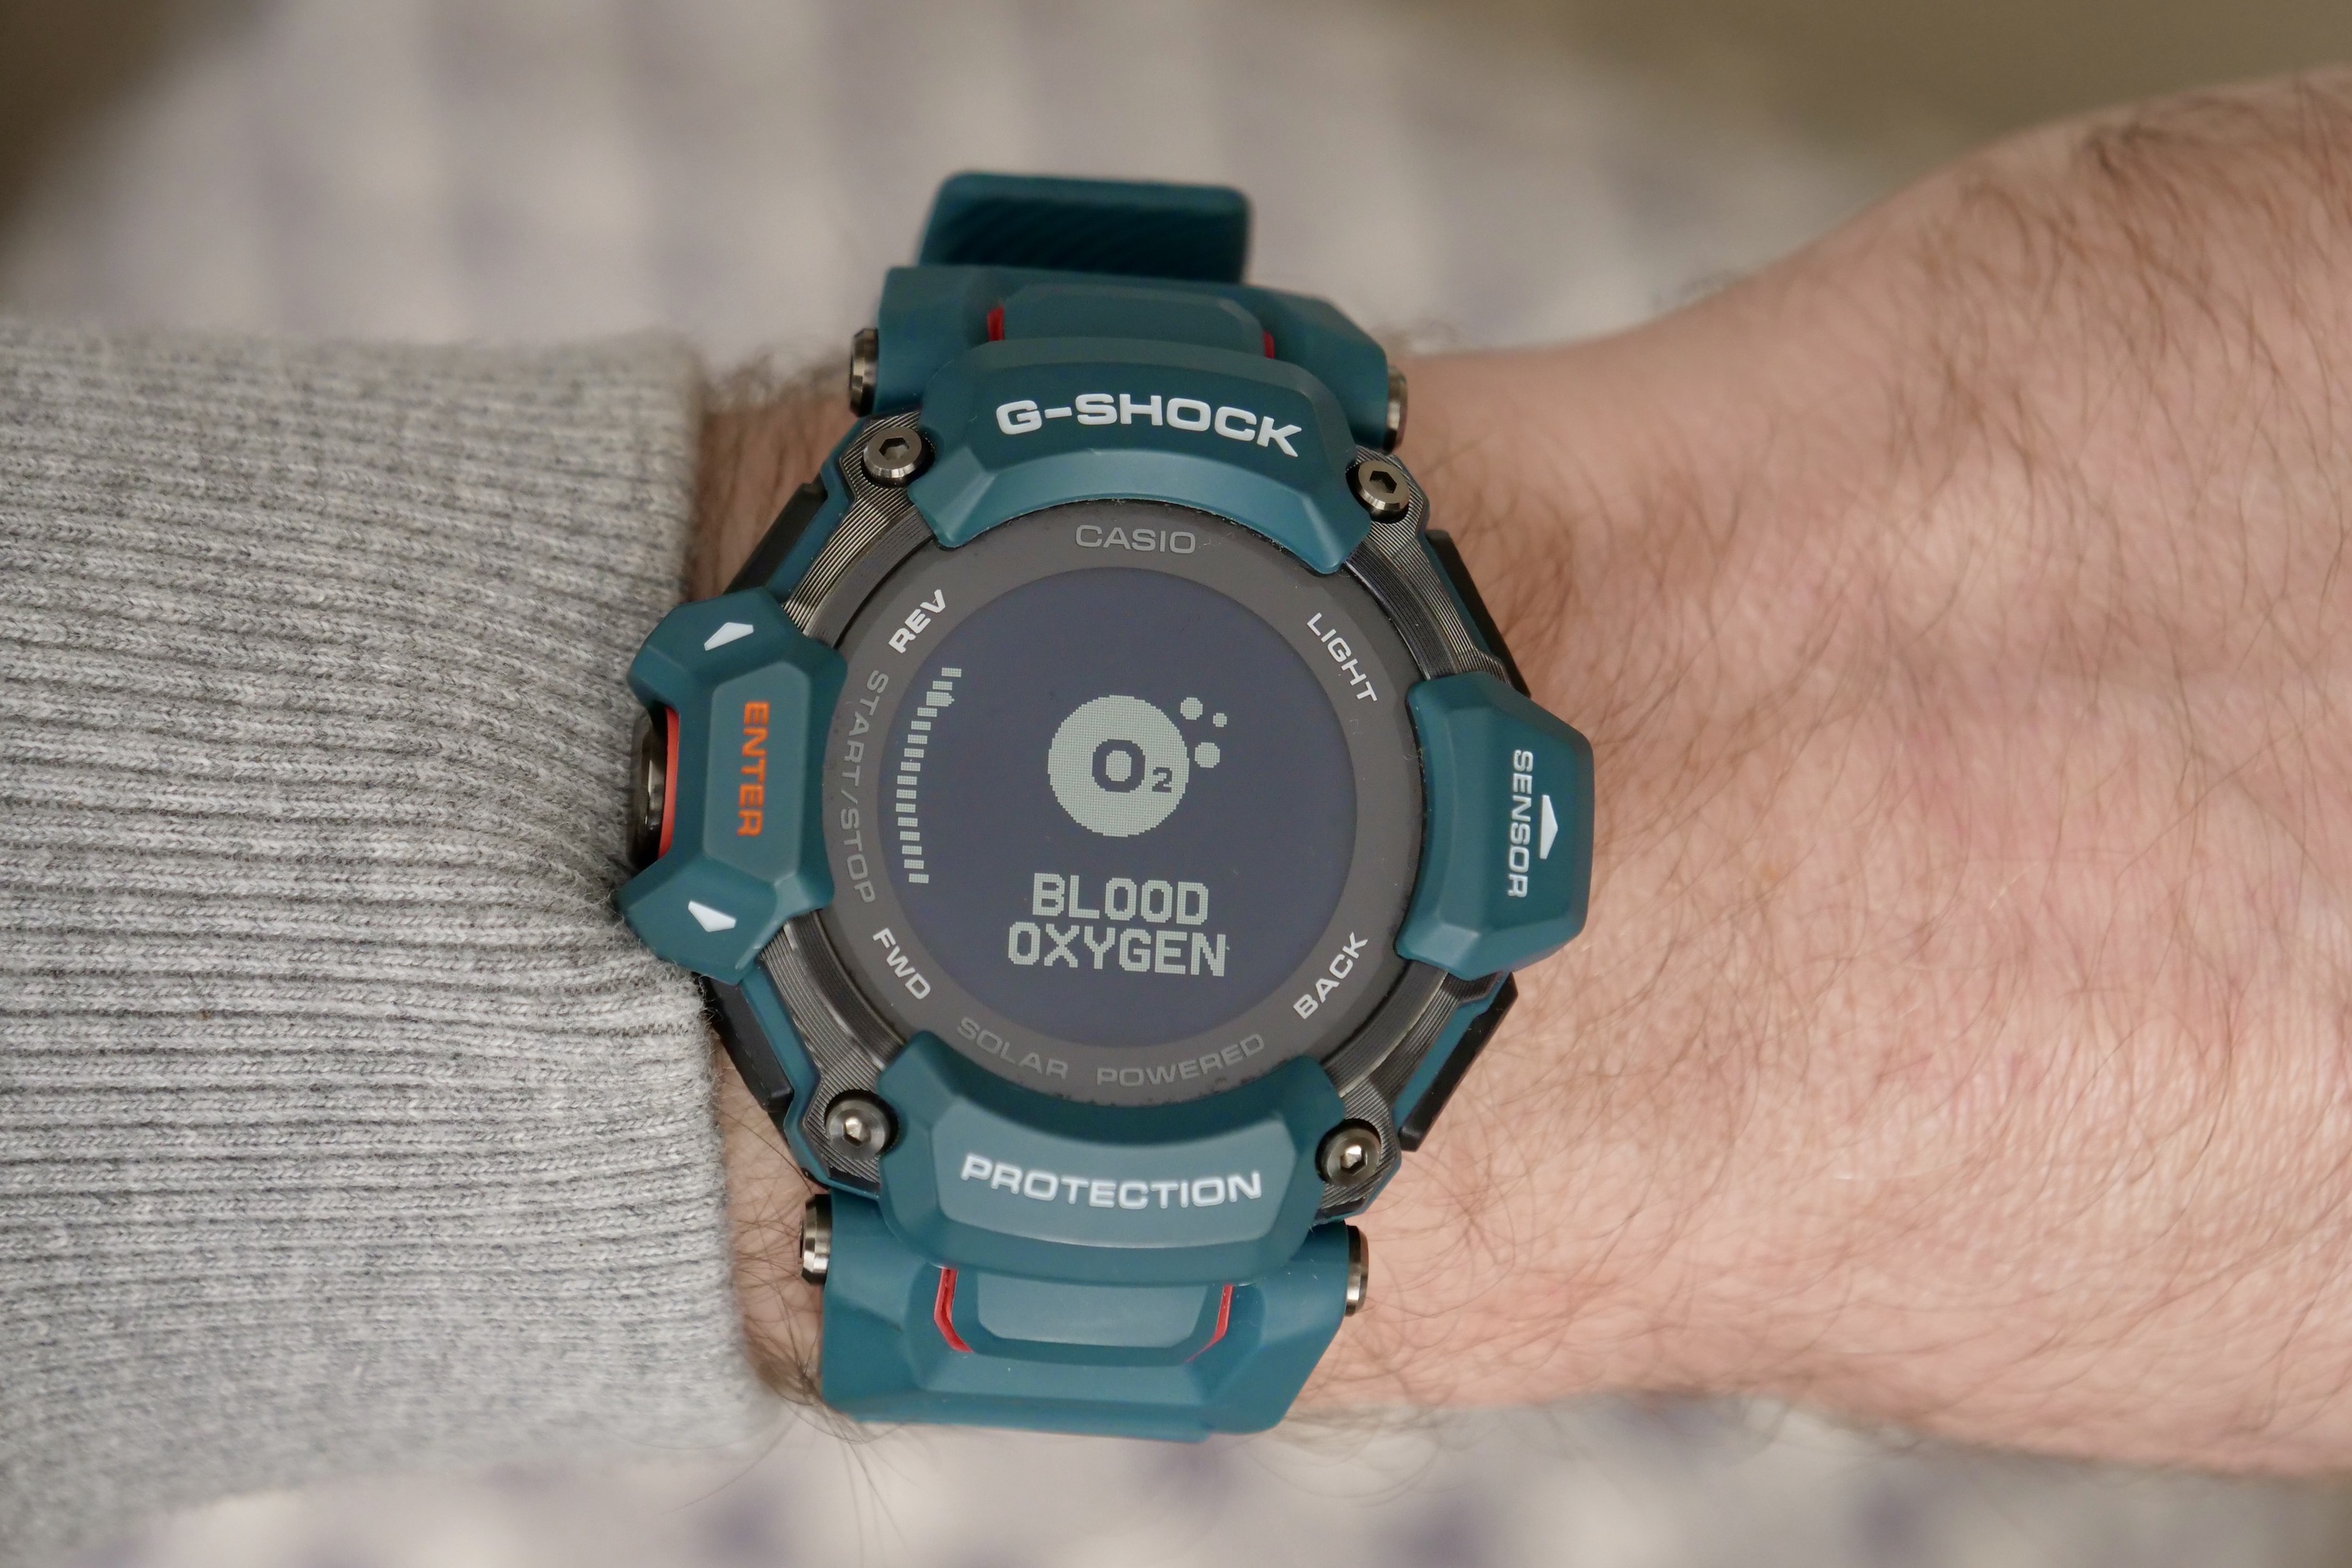 The G-Shock GBD-H2000 can measure blood oxygen levels.